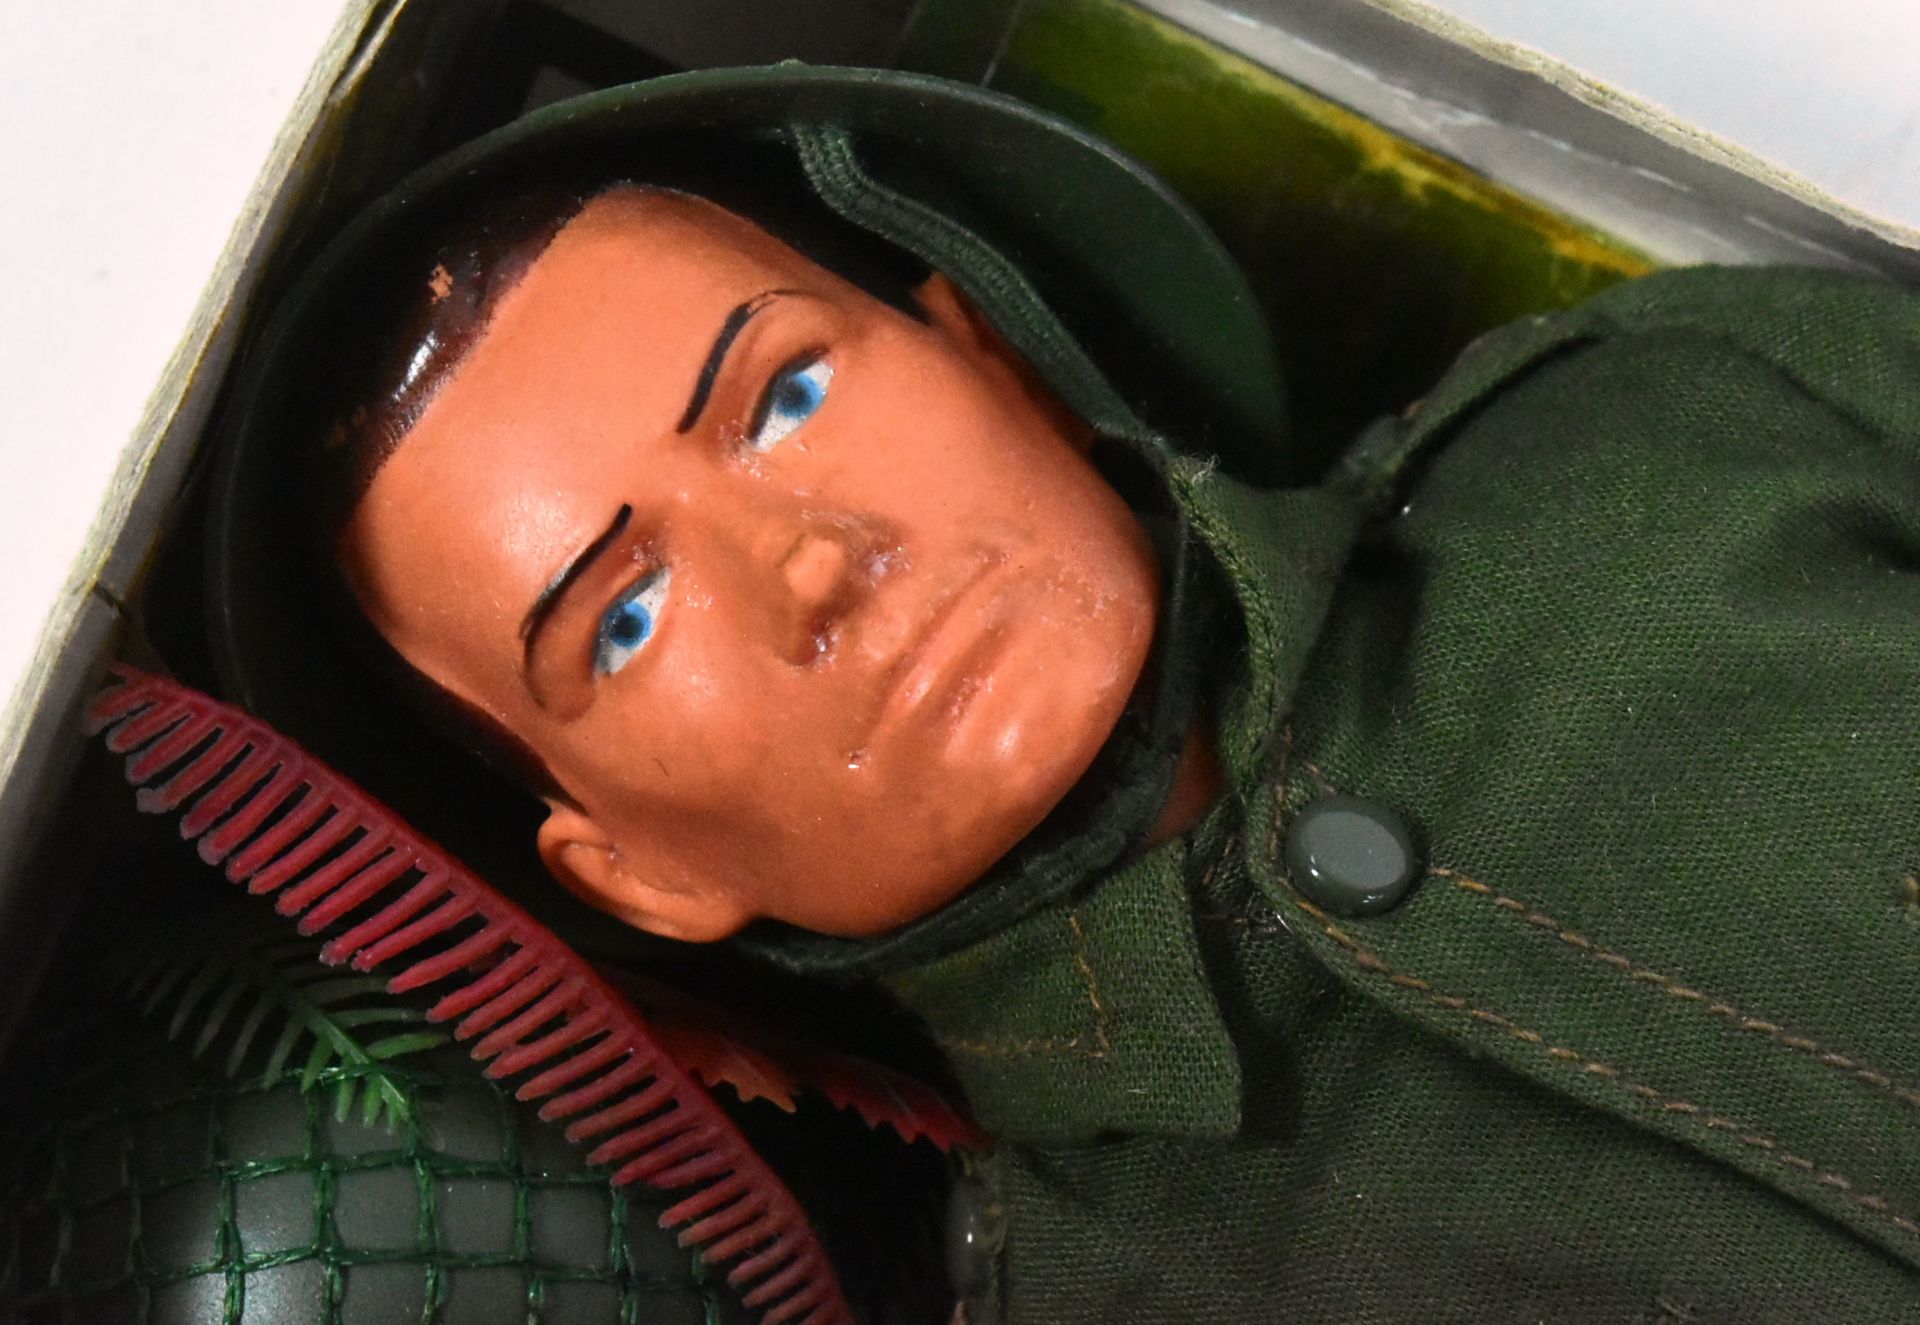 TOMMY GUNN - PEDIGREE - VINTAGE ACTION MAN STYLE FIGURE / DOLL - Image 3 of 5